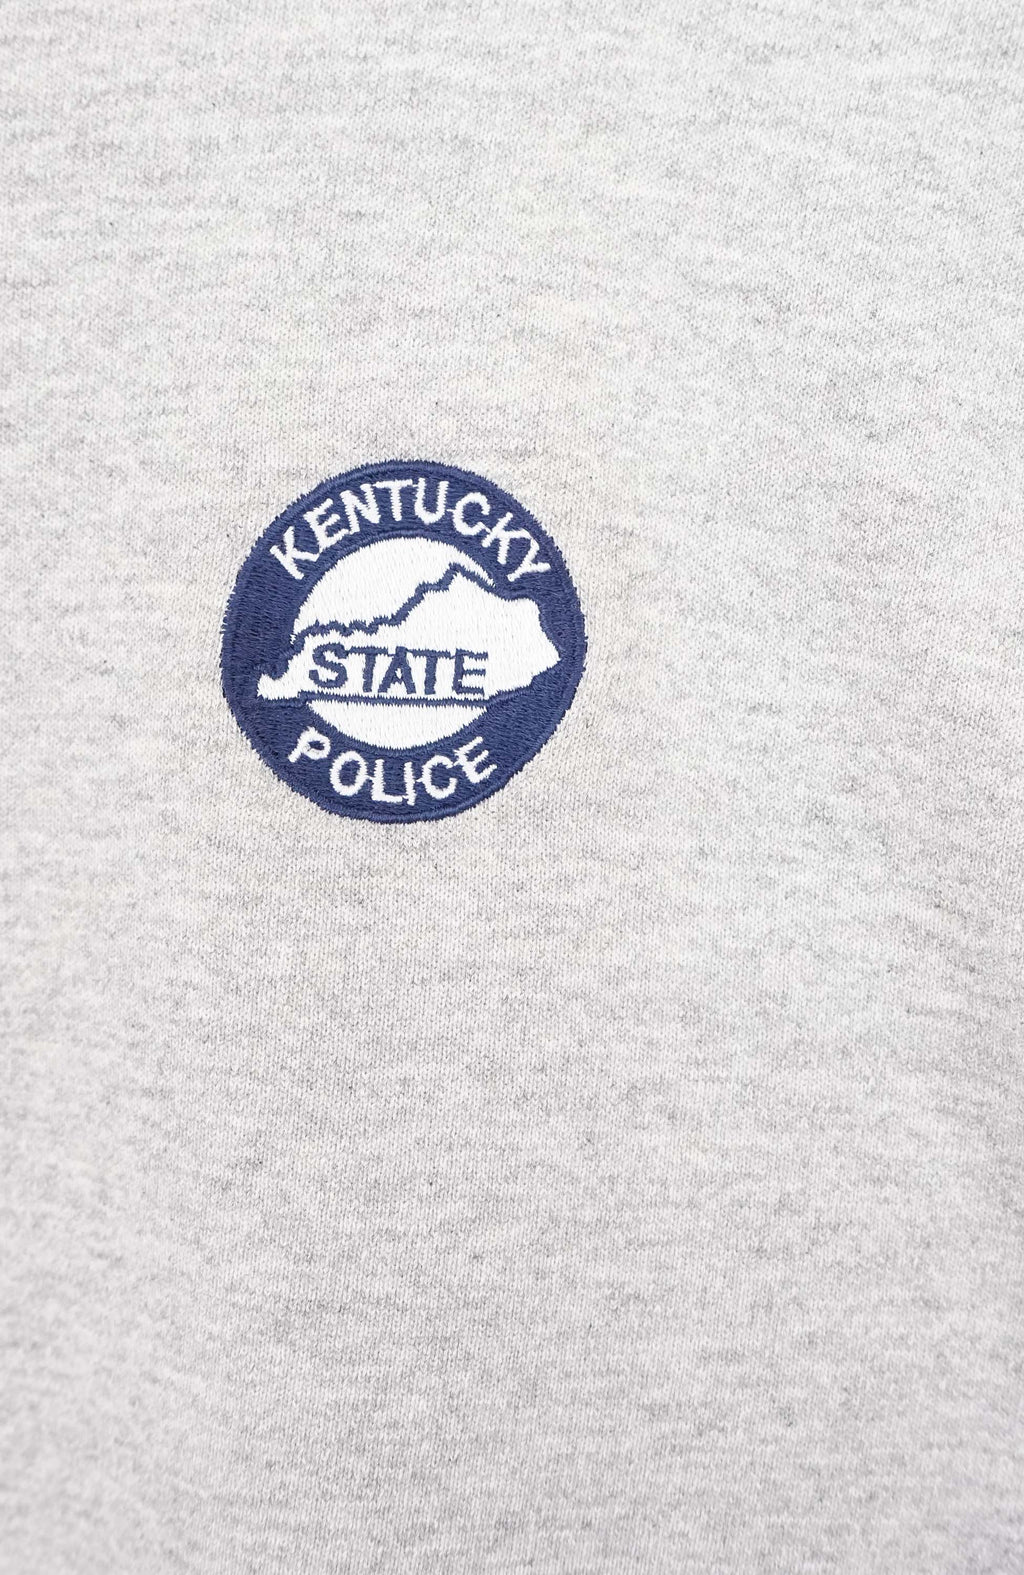 VINTAGE KENTUCKY STATE POLICE SWEATER (XL)